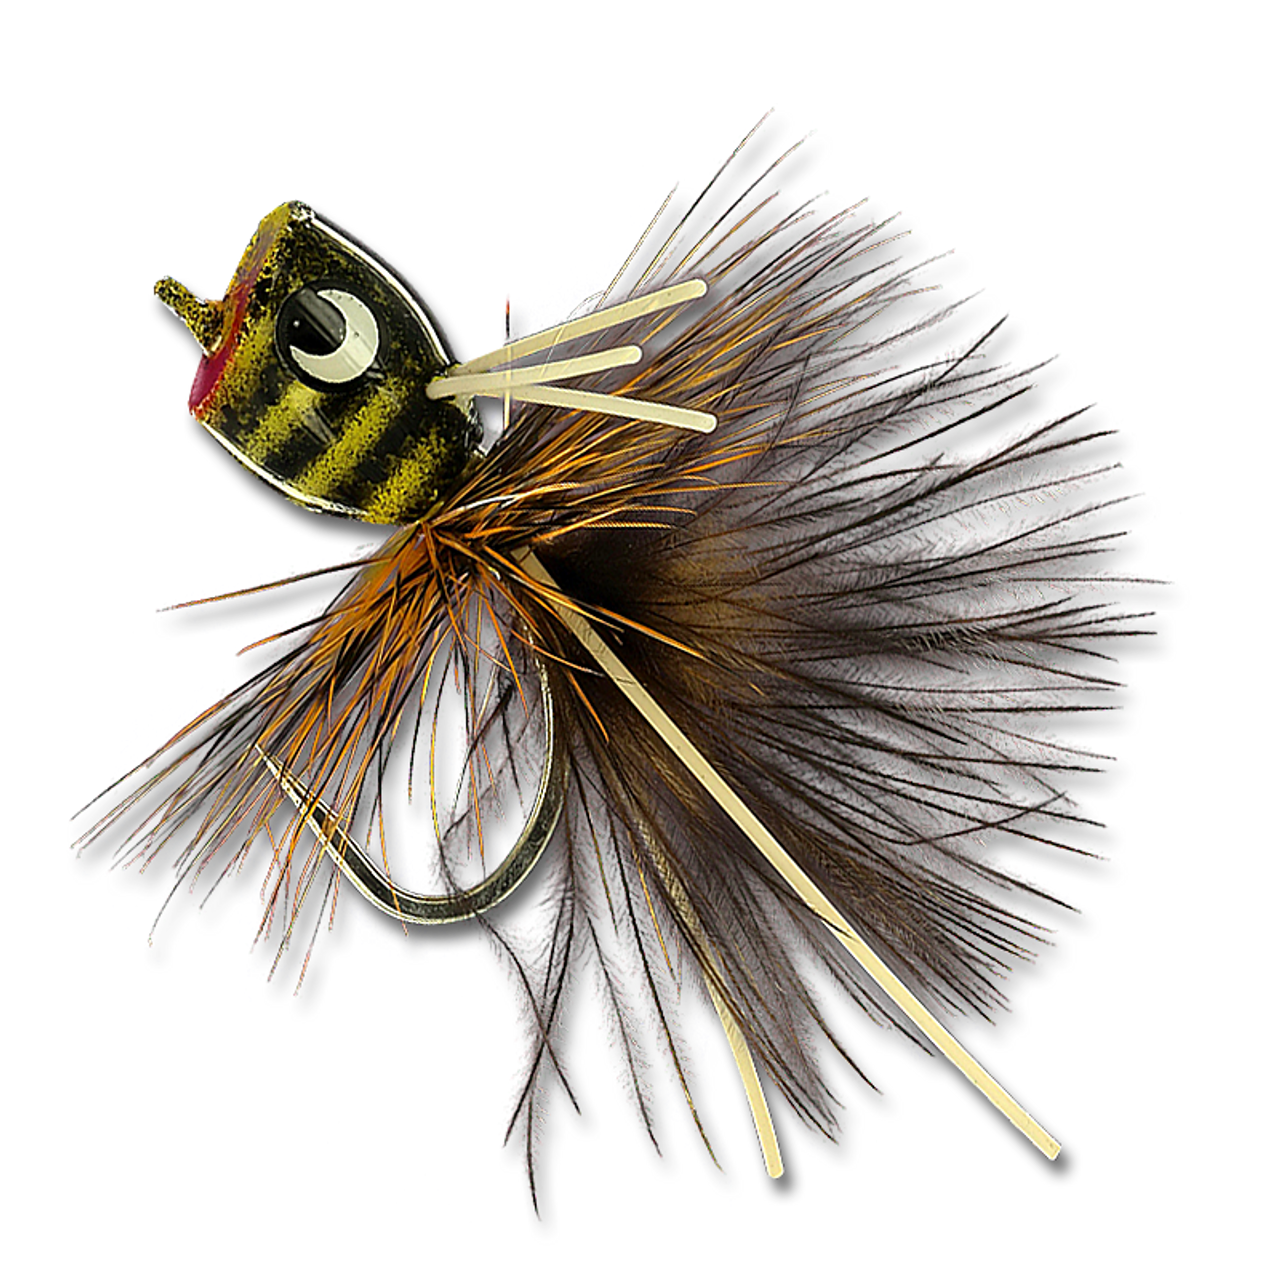 Bass & Bluegill Mini Poppers at The Fly Shop